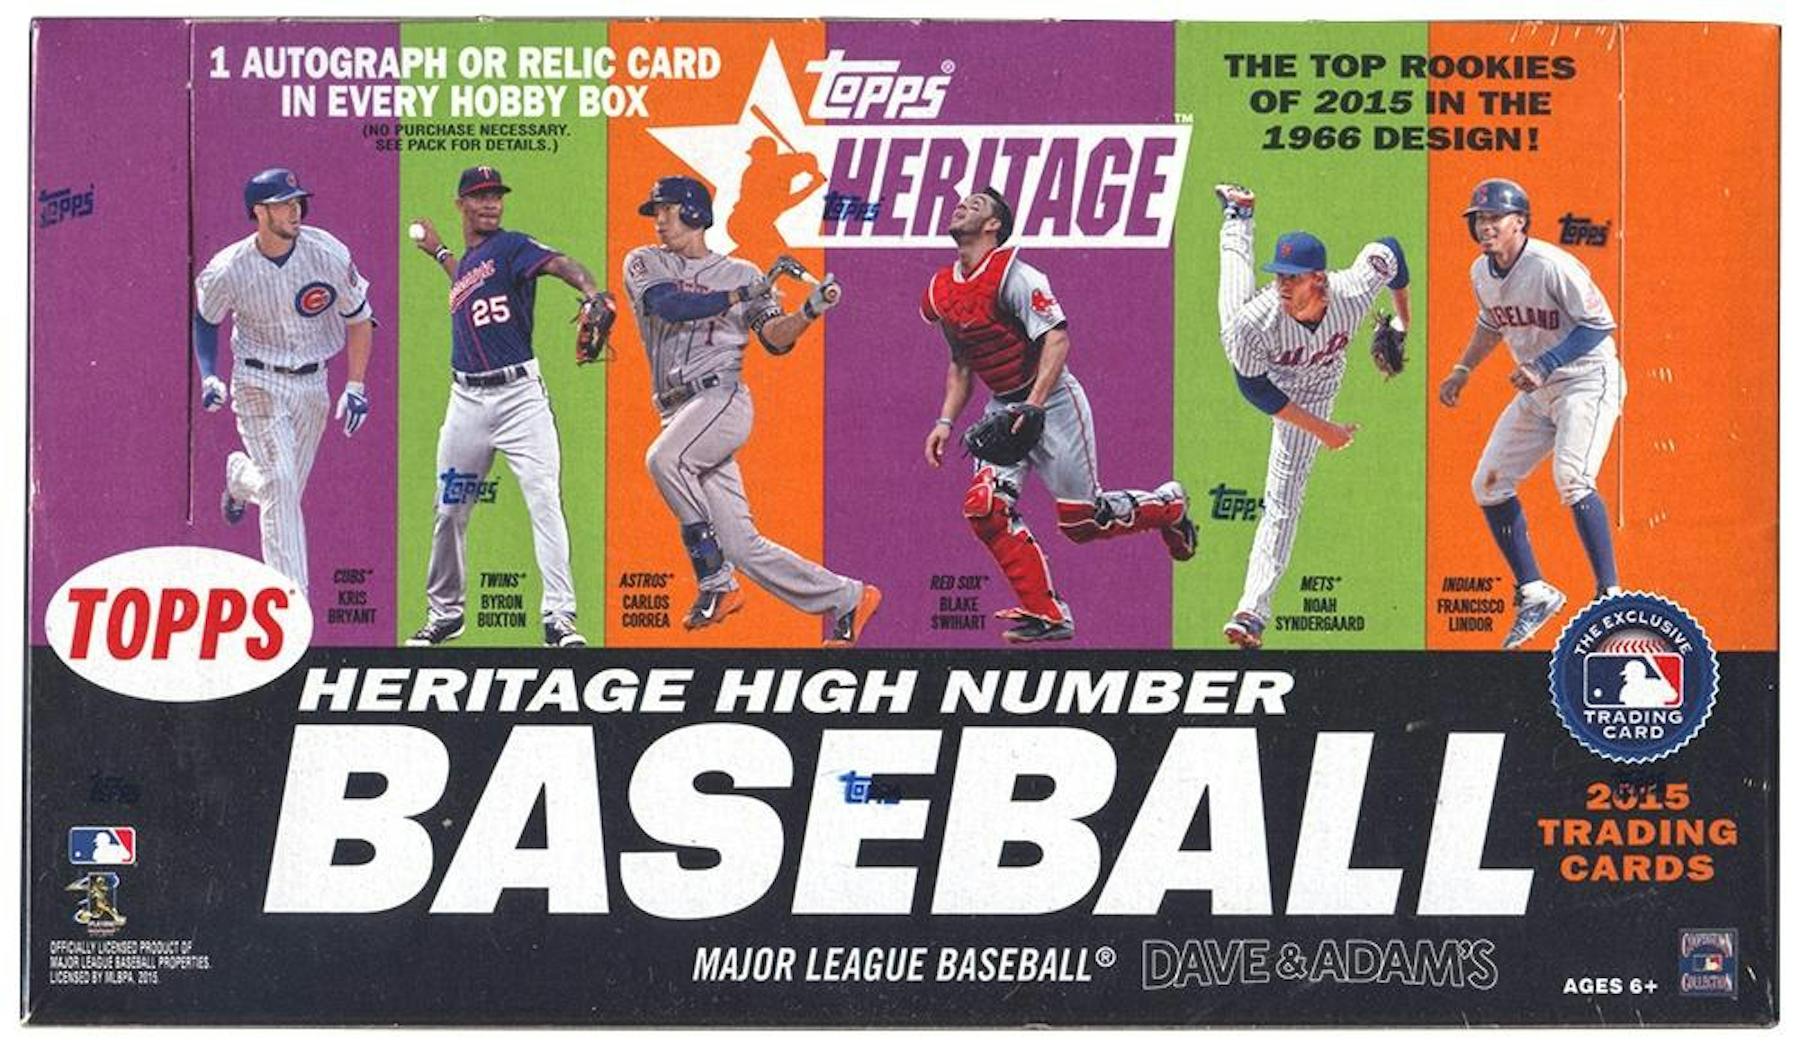 2015 Topps Heritage High Number Baseball Variation Guide, Gallery